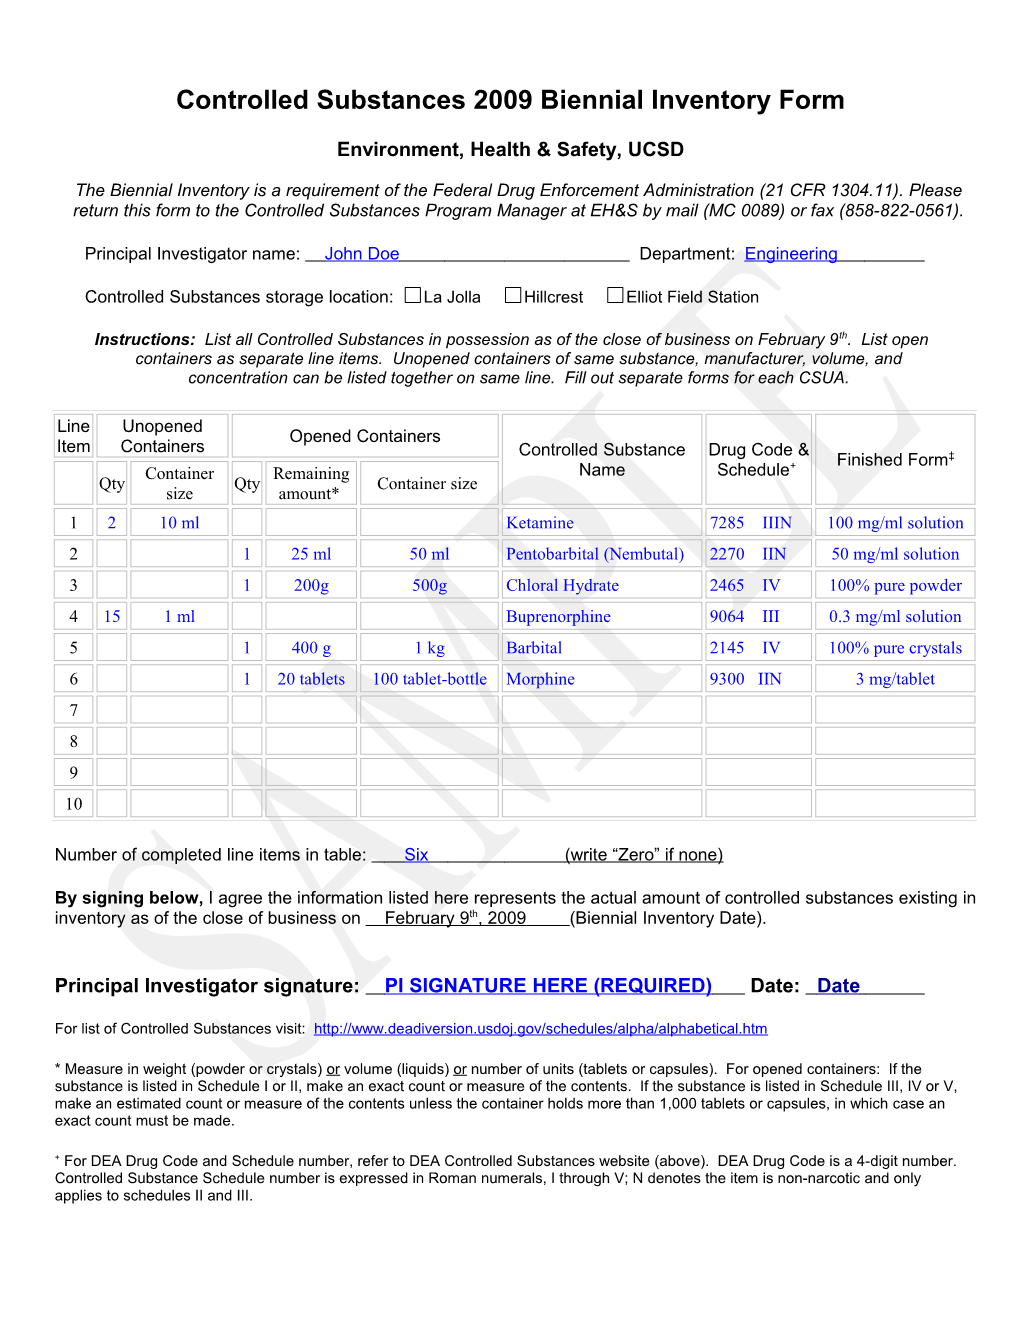 Controlled Substance Inventory Form